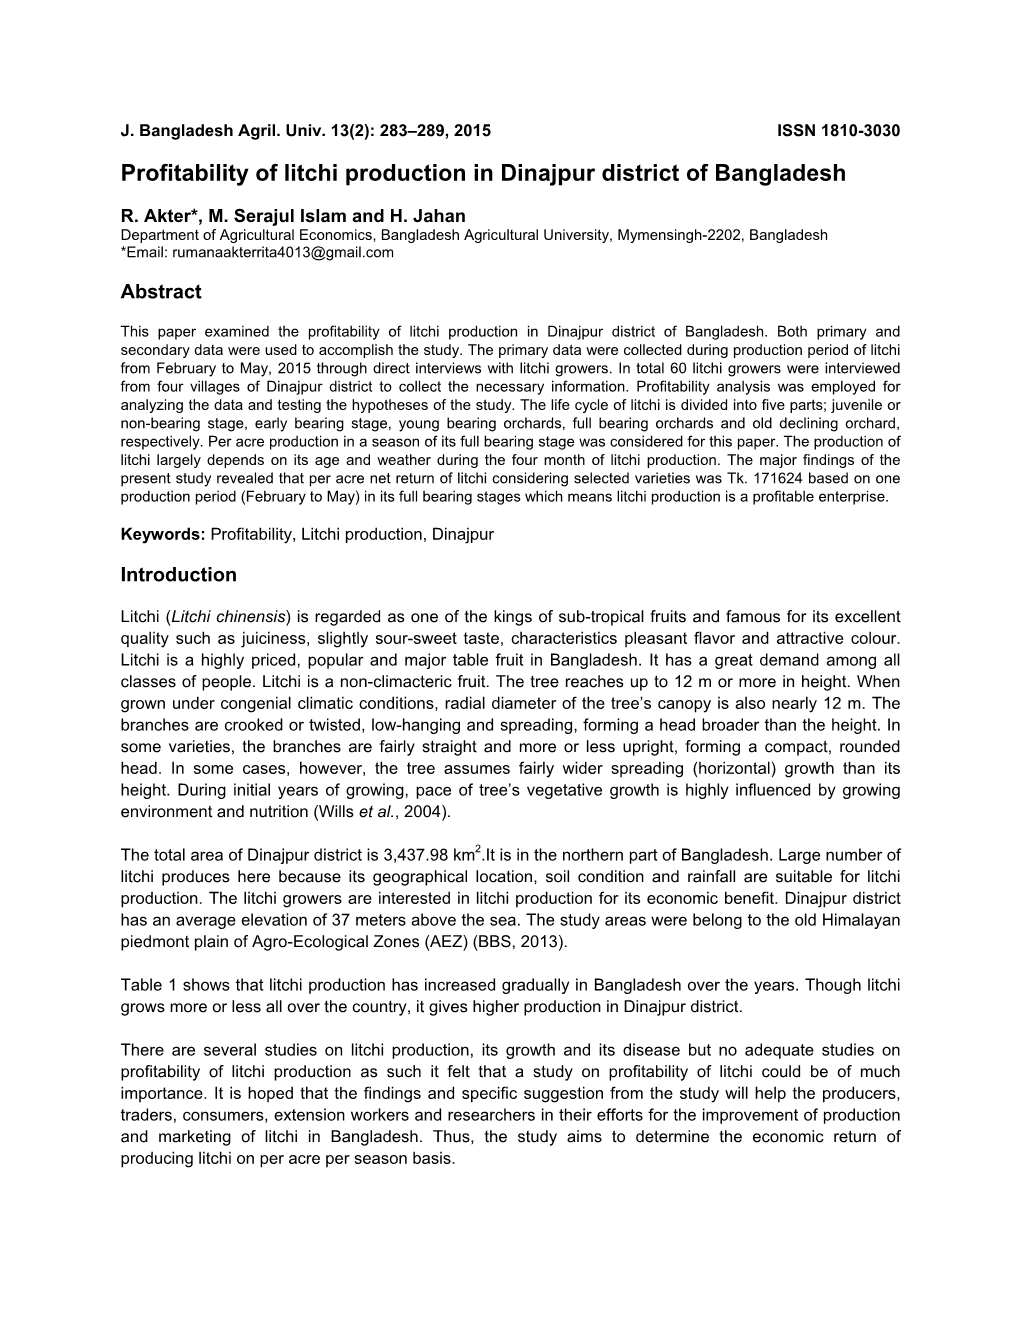 Profitability of Litchi Production in Dinajpur District of Bangladesh